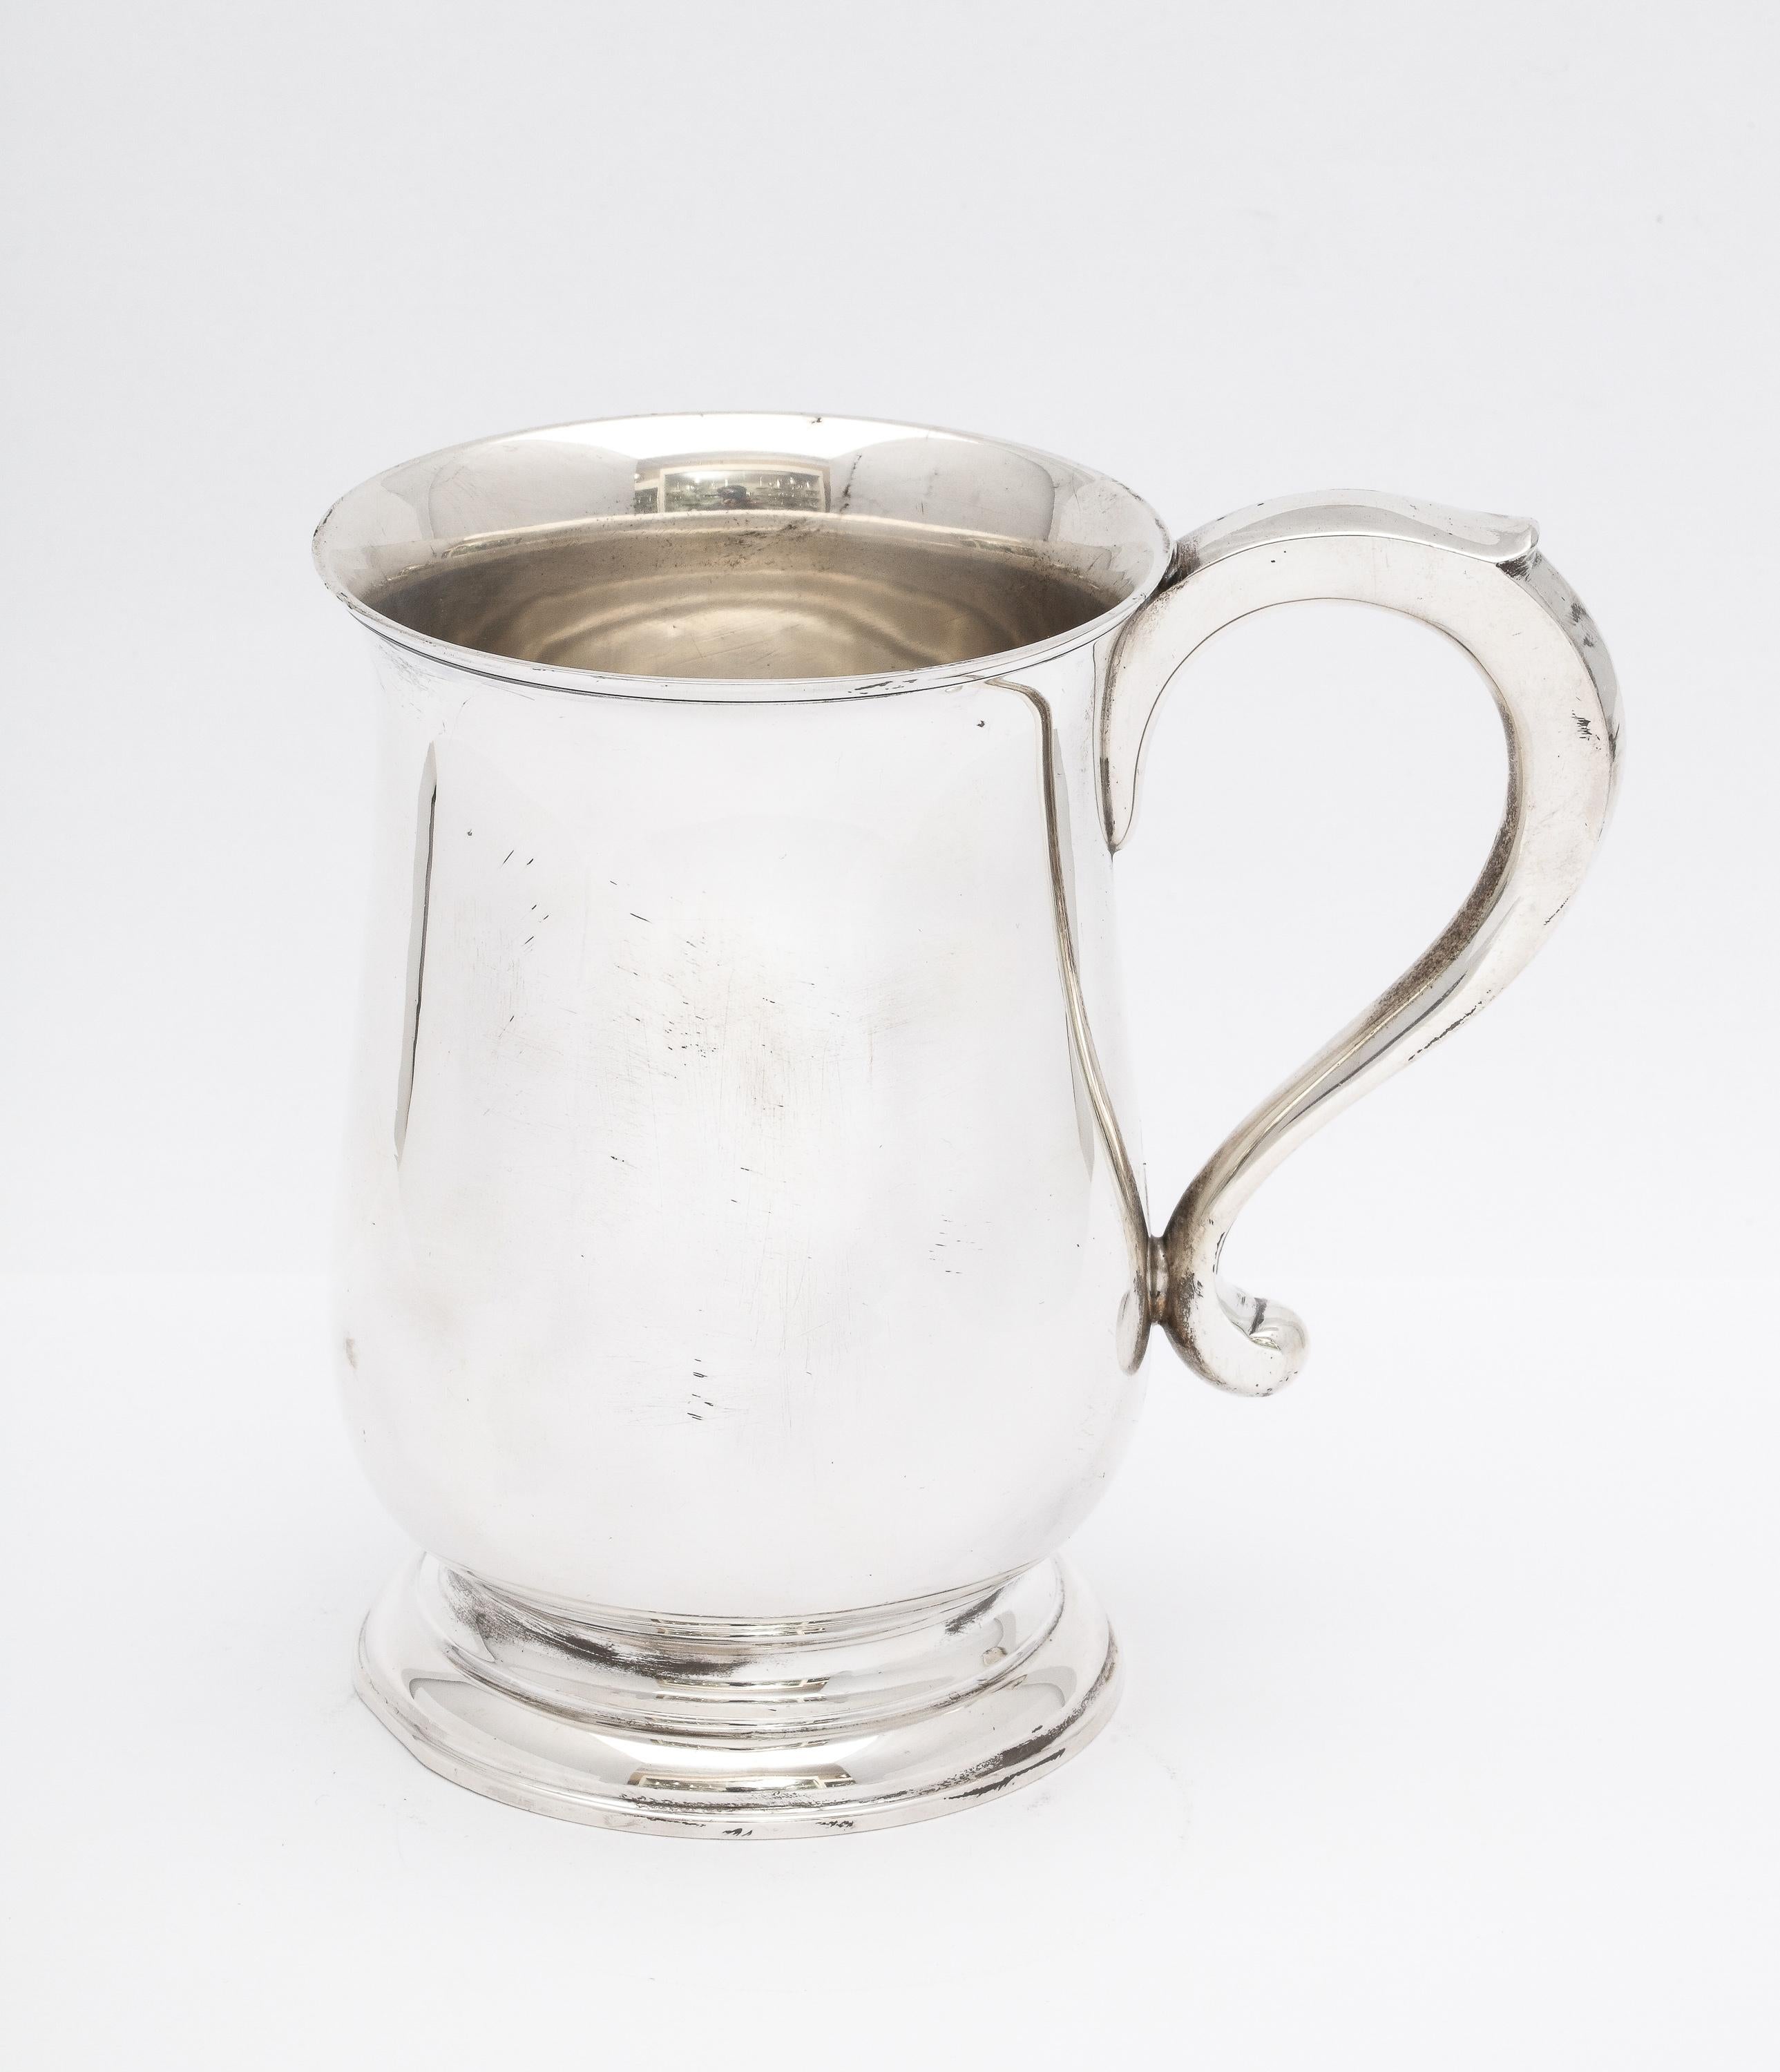 Large, sterling silver, Edwardian period, George III-style tankard, London, year-hallmarked for 1908, Blackmore and Fletcher, Ltd. - makers. Measures 5 inches high x 3 3/4 inches diameter across widest area of body x 5 1/4 inches wide from outer